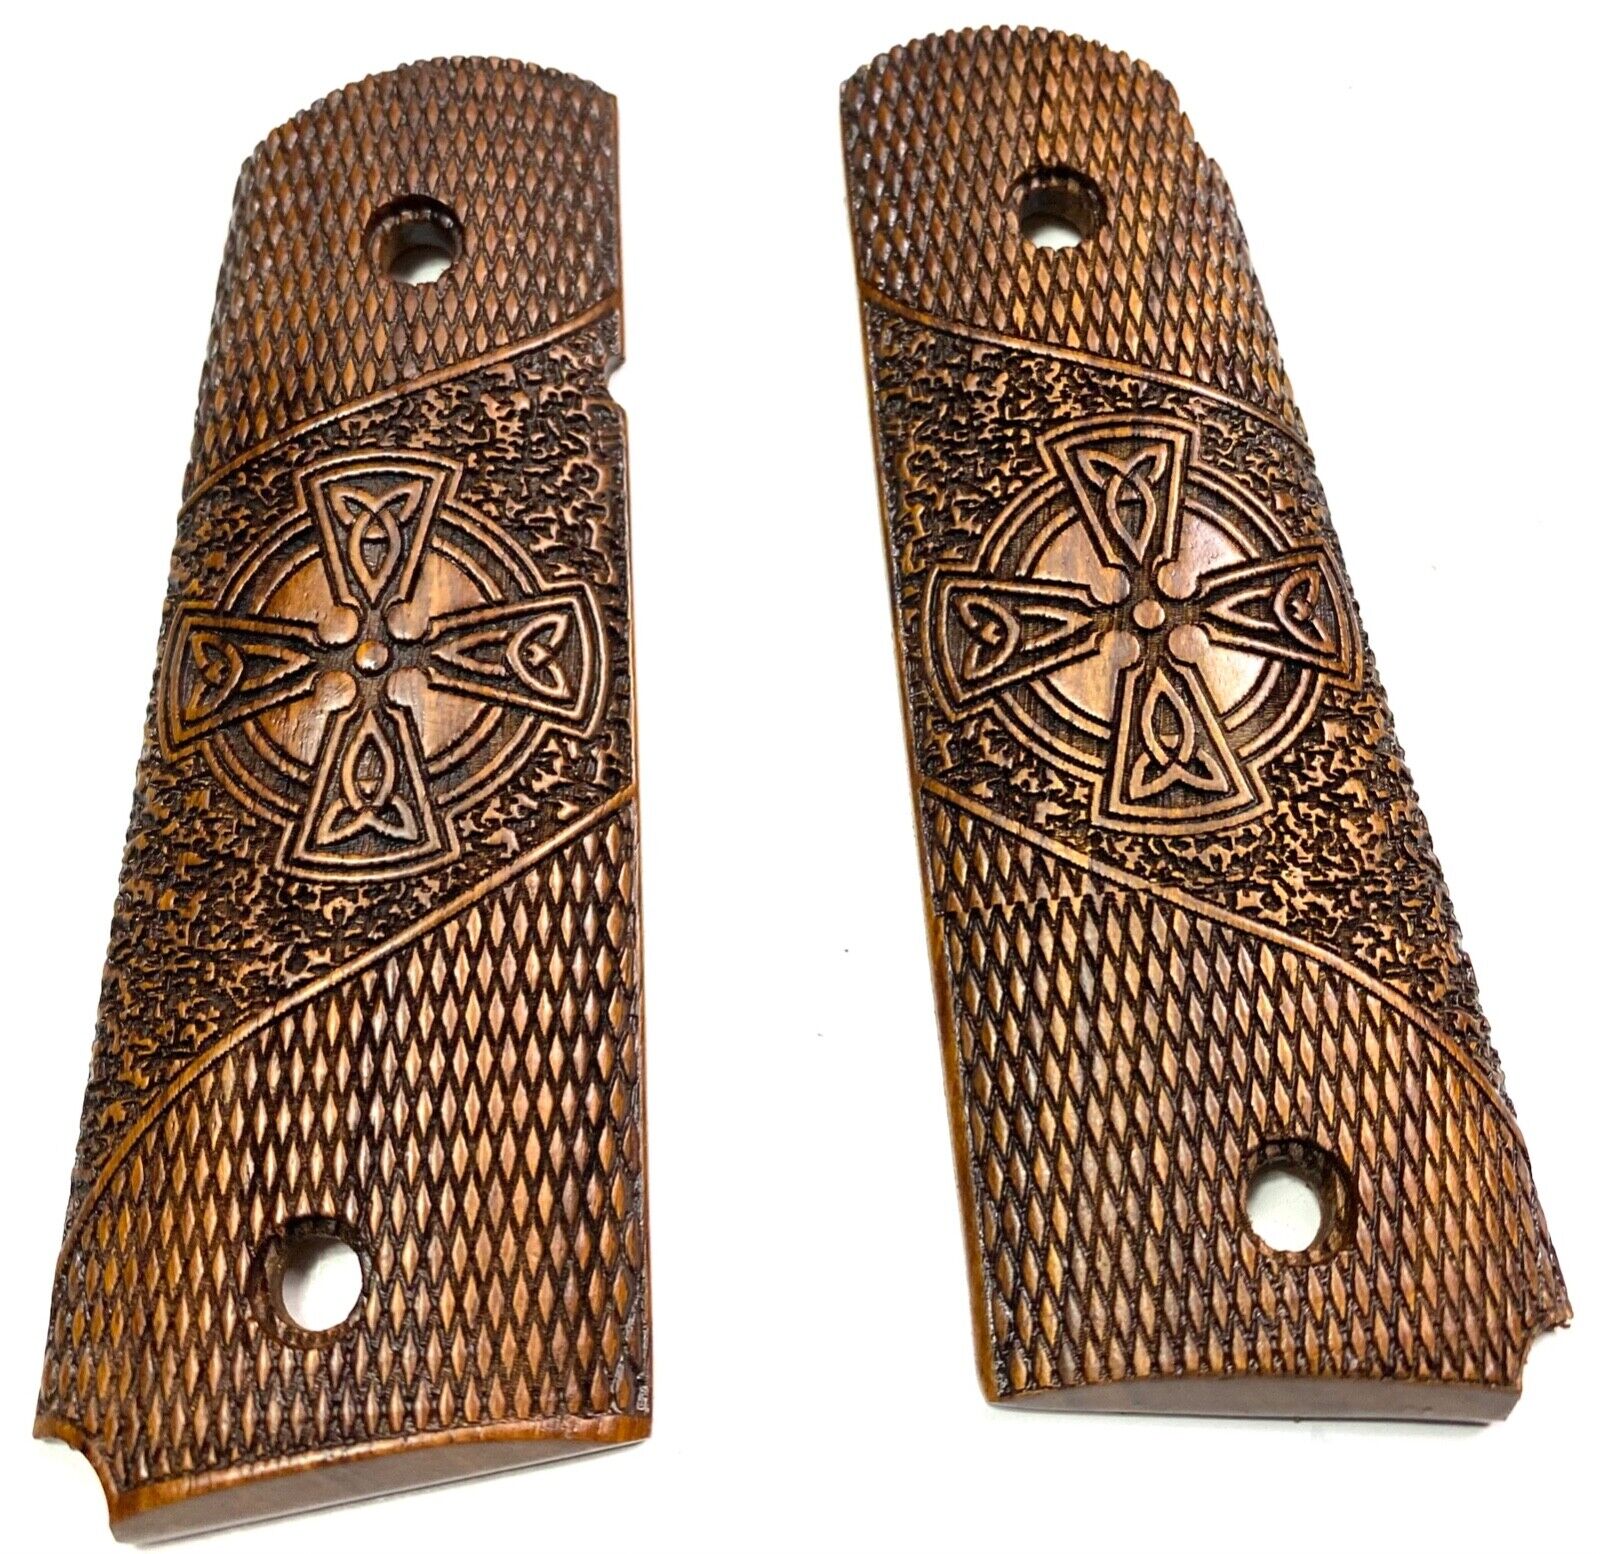 WWII WWI US ARMY COLT M1911 M1911A1 .45 WOODEN PISTOL GRIPS-IRISH CLOVER DESIGNS